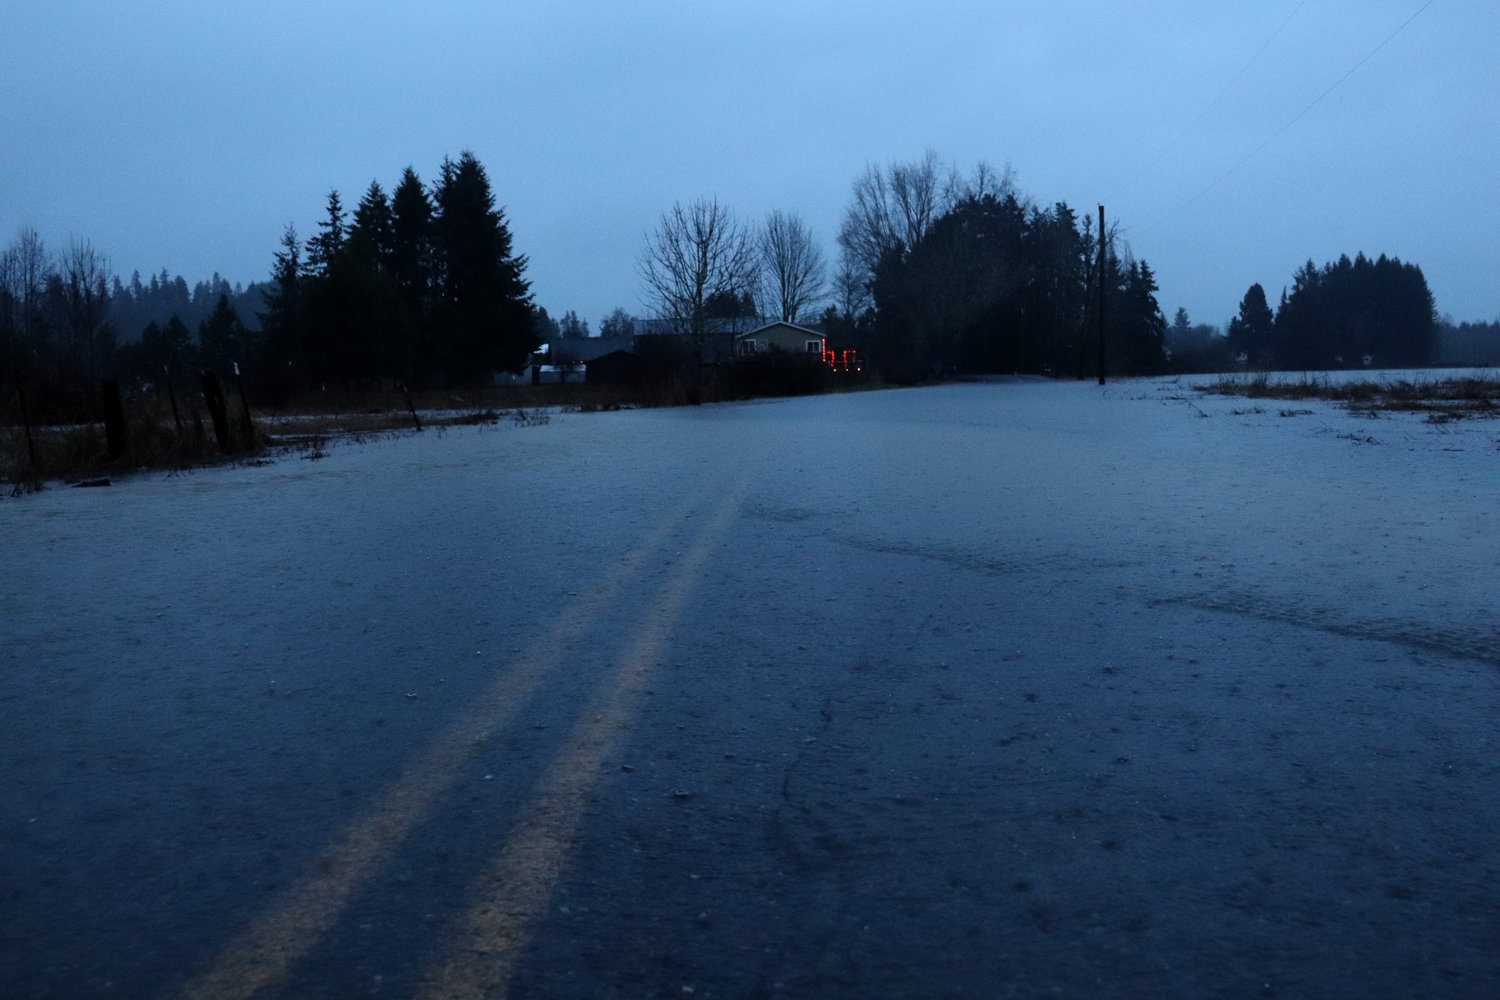 Joppish Road near Galvin is pictured flooded in this photo captured last Thursday night.